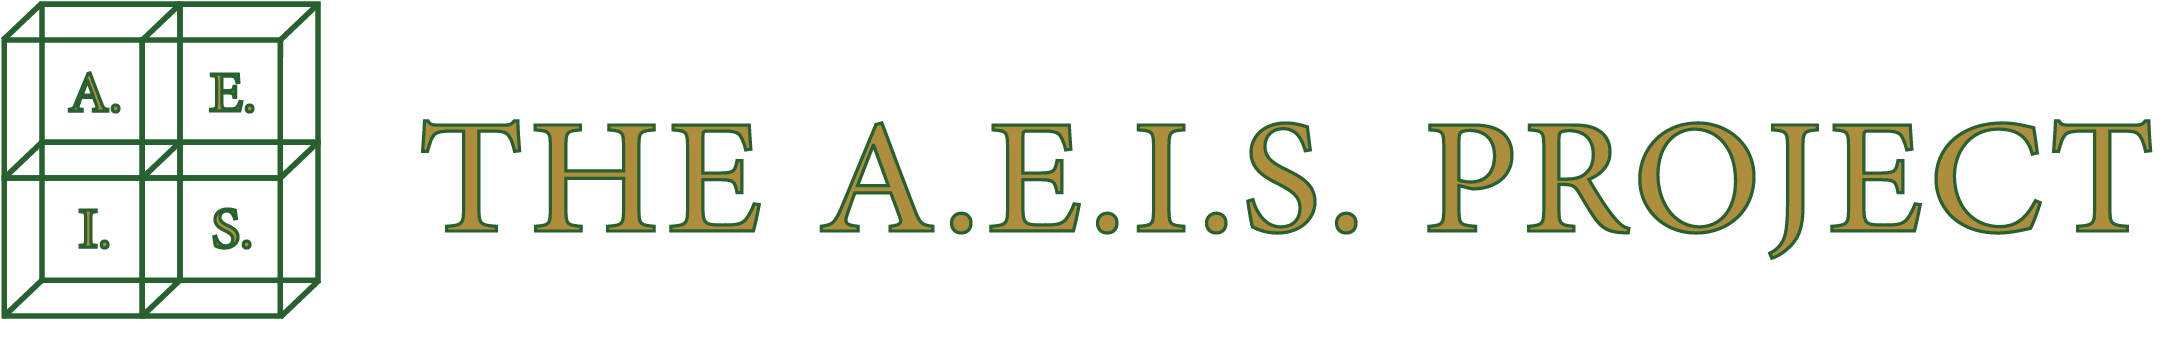 The AEIS Project